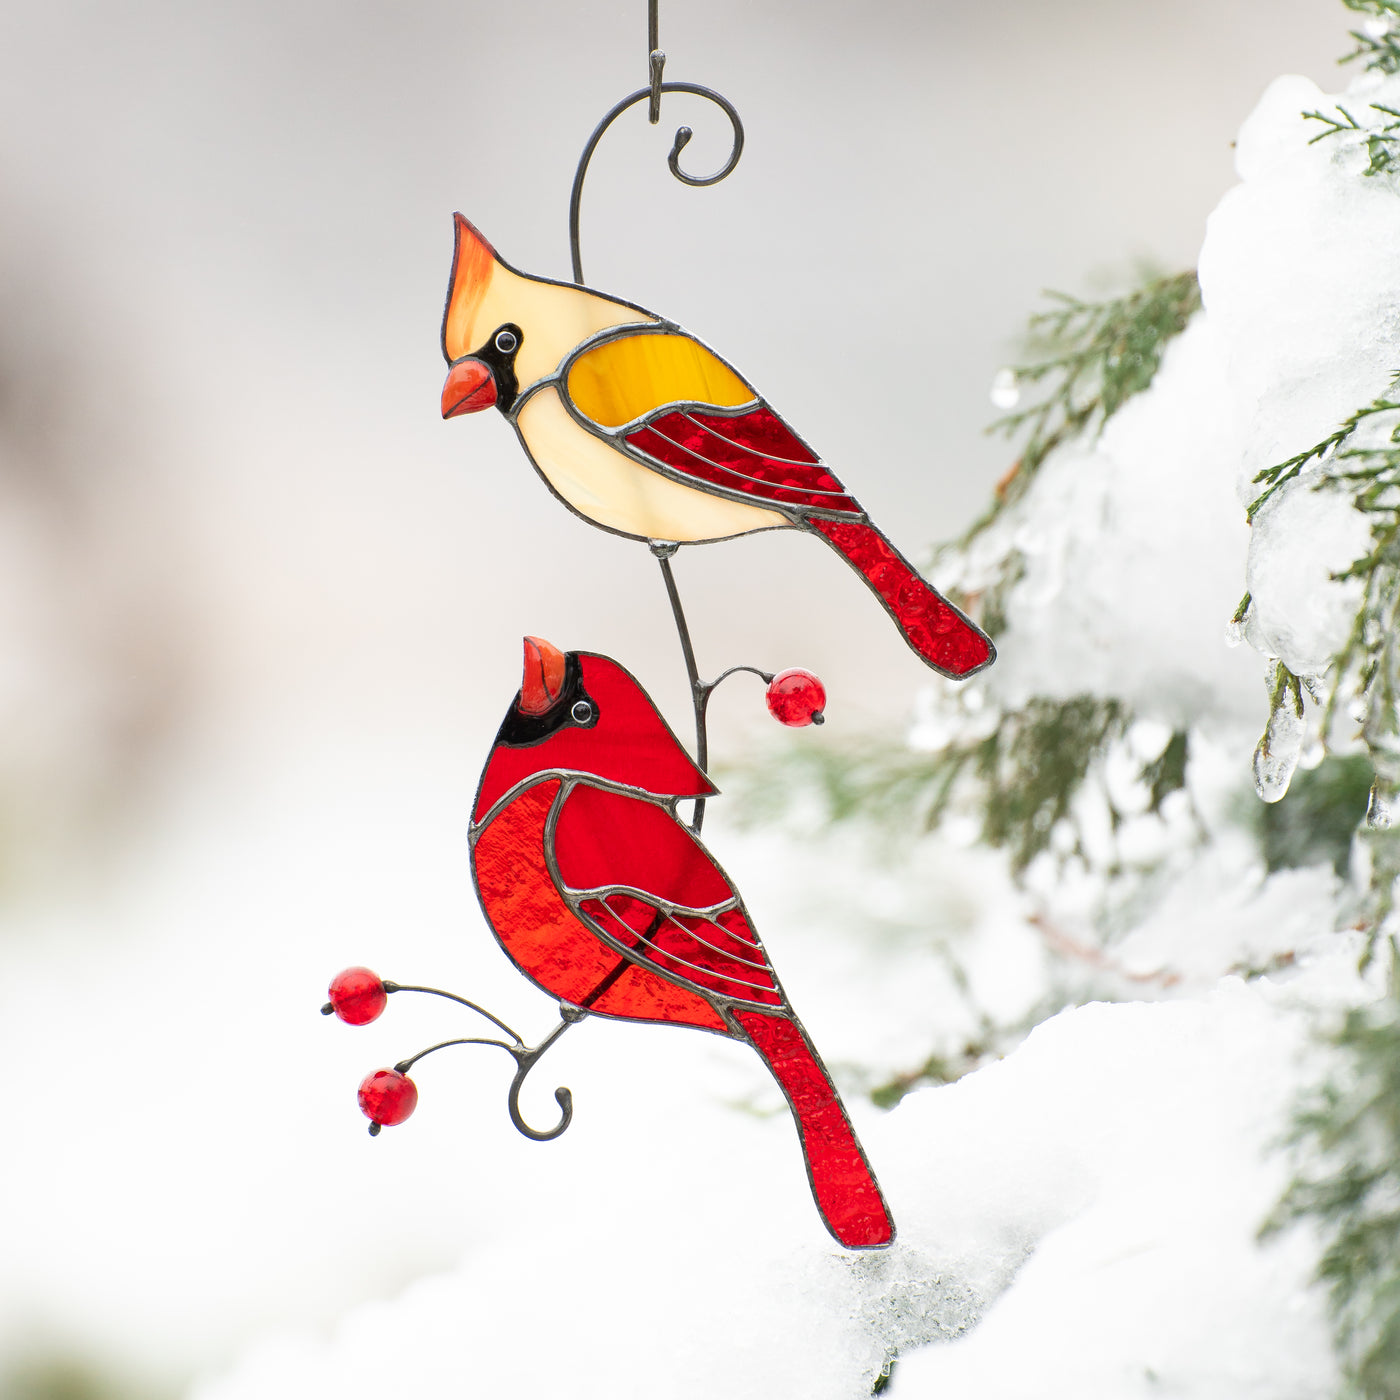 Stained glass cardinals looking at each other on the branch with berries suncatcher